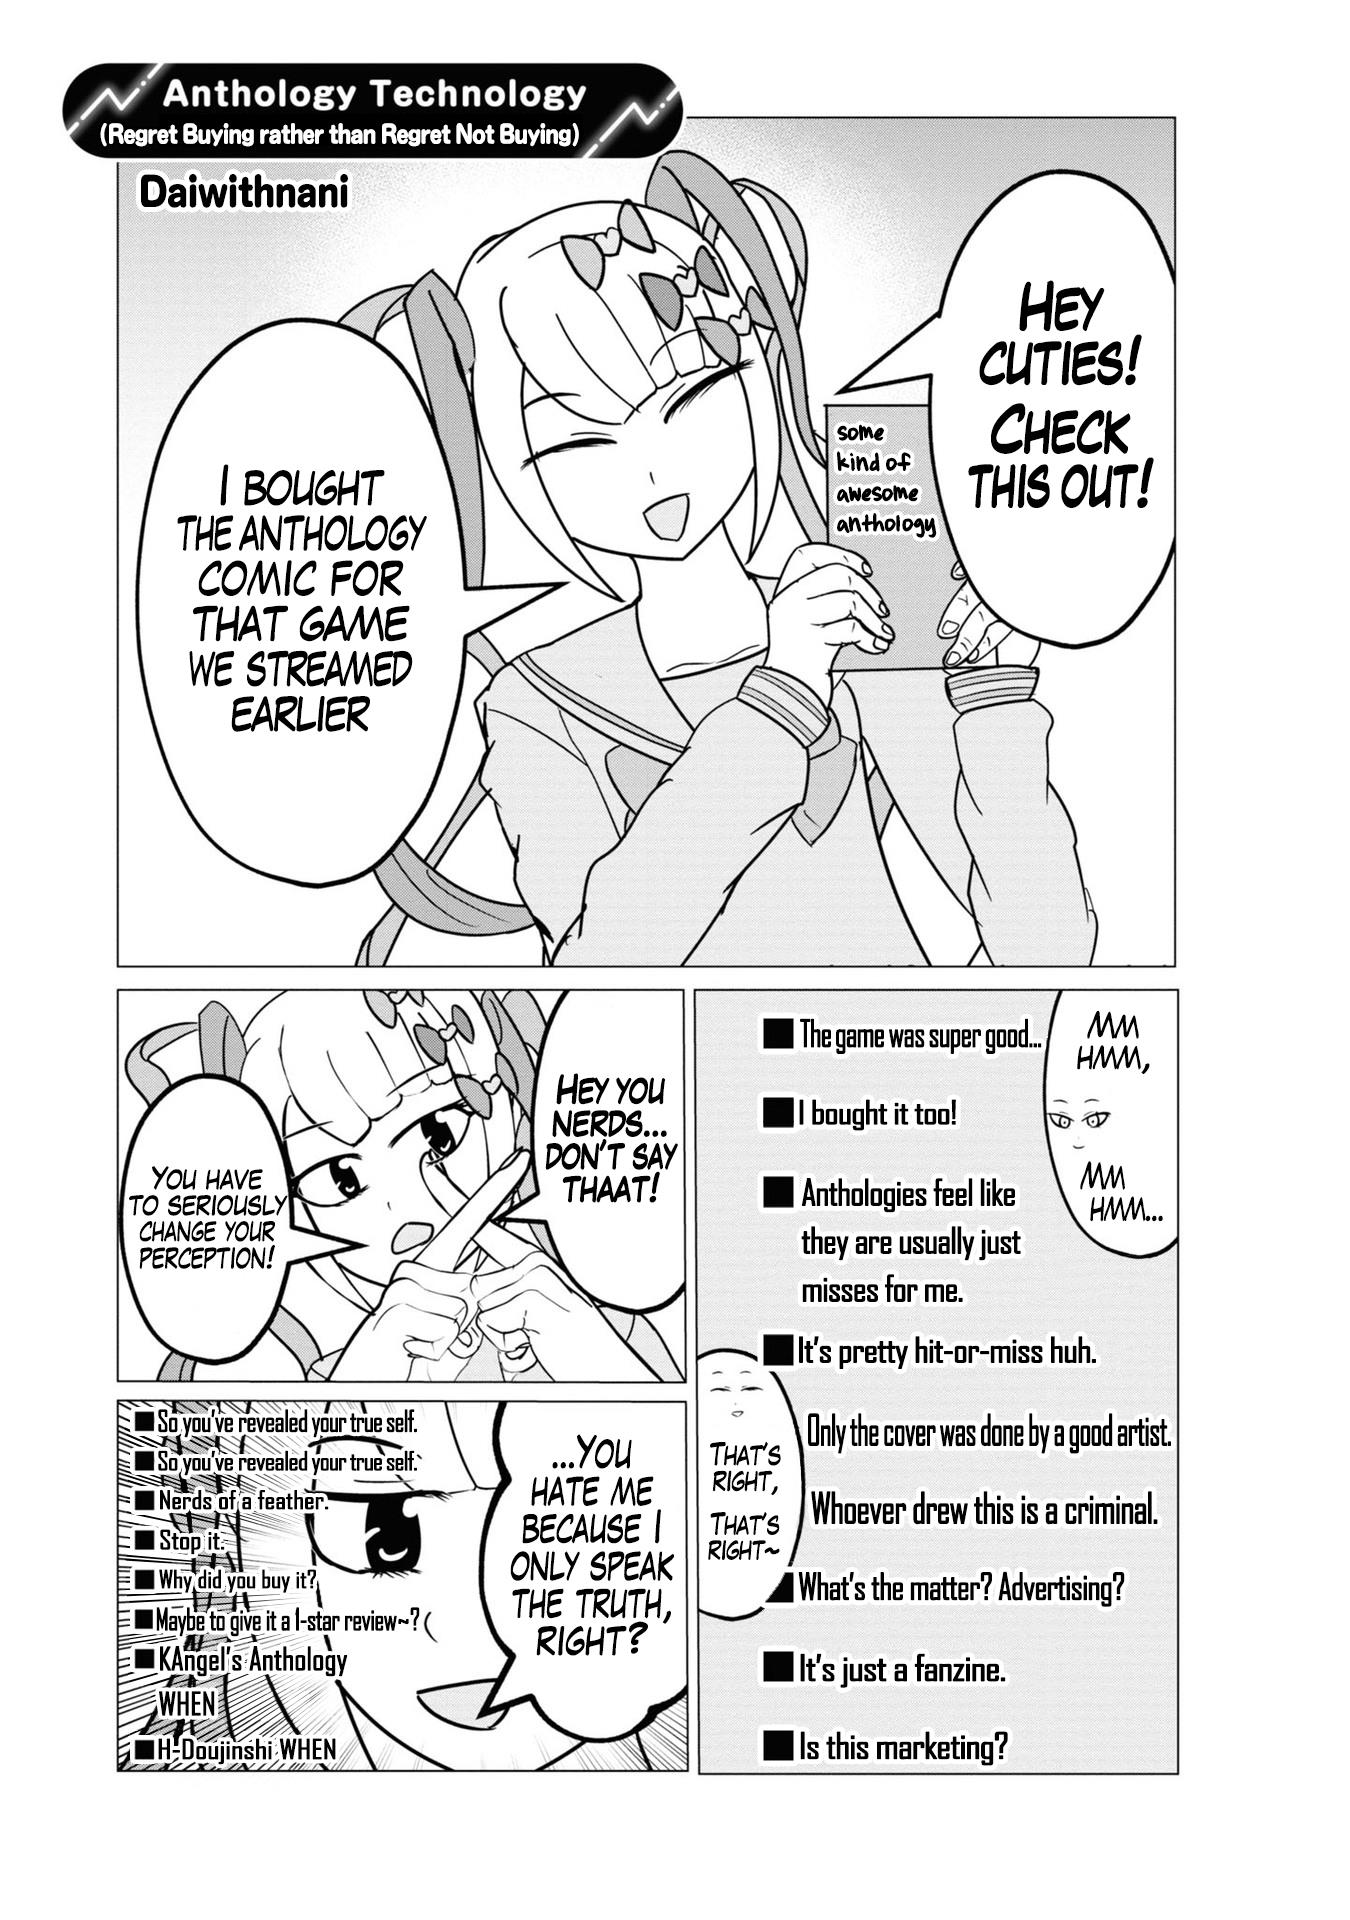 Super Ten-Chan! Needy Girl Overdose Official Anthology Vol.1 Chapter 5: Anthology Technology (Regret Buying Rather Than Regret Not Buying) - Picture 2